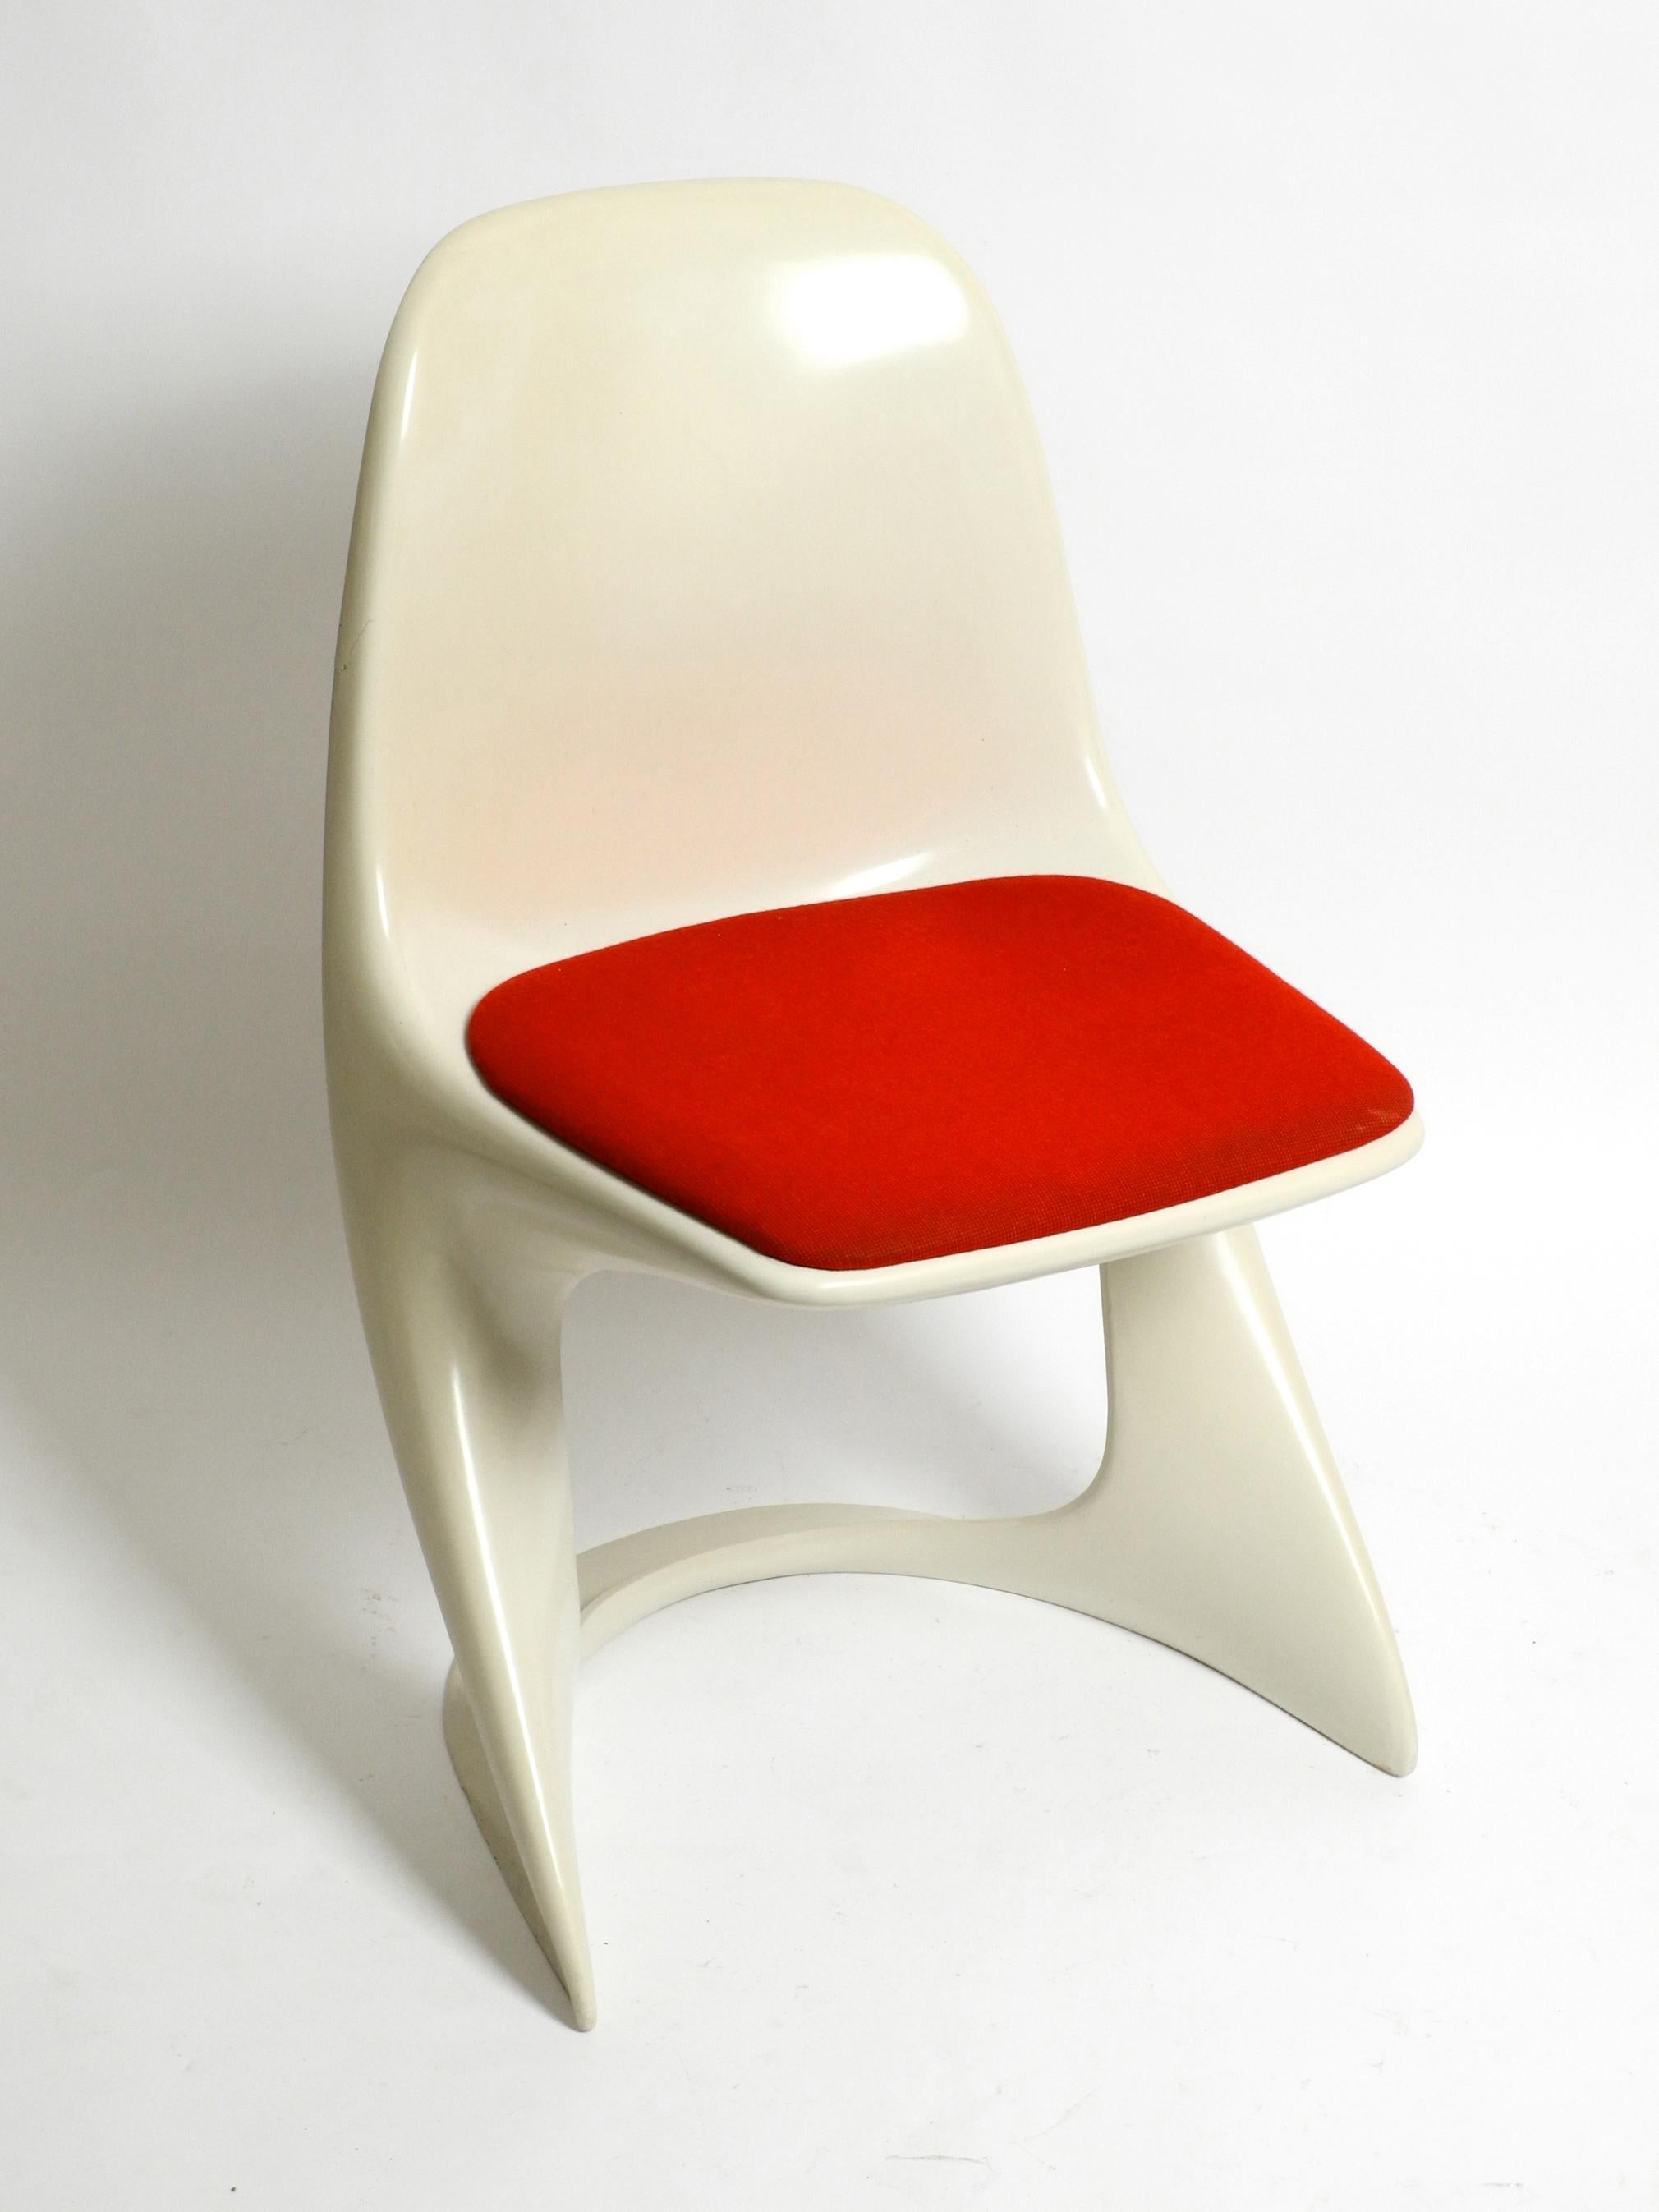 Casala Chair Model 2001/2002 from the 1970s with Original Red Fabric Upholstery 8